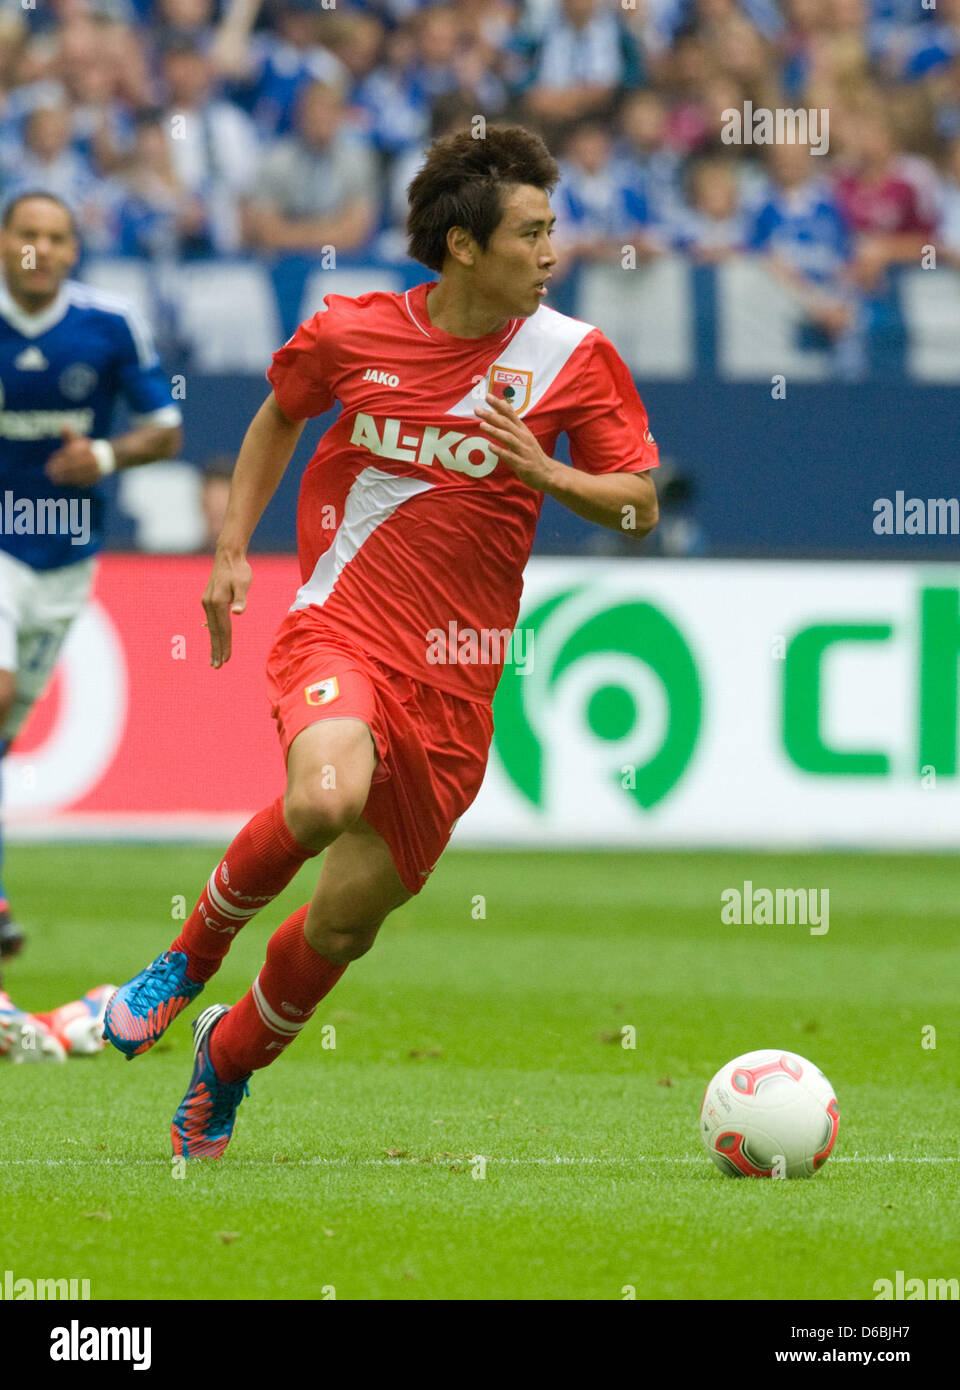 Augsburg's Ja-Cheol Koo is pictured in action during the Bundesliga soccer match between FC Schalke 04 and FC Augsburg at VeltinsArena in Gelsenkirchen, Germany, 01 September 2012. Photo: BERND THISSEN   (ATTENTION: EMBARGO CONDITIONS! The DFL permits the further utilisation of up to 15 pictures only (no sequntial pictures or video-similar series of pictures allowed) via the intern Stock Photo